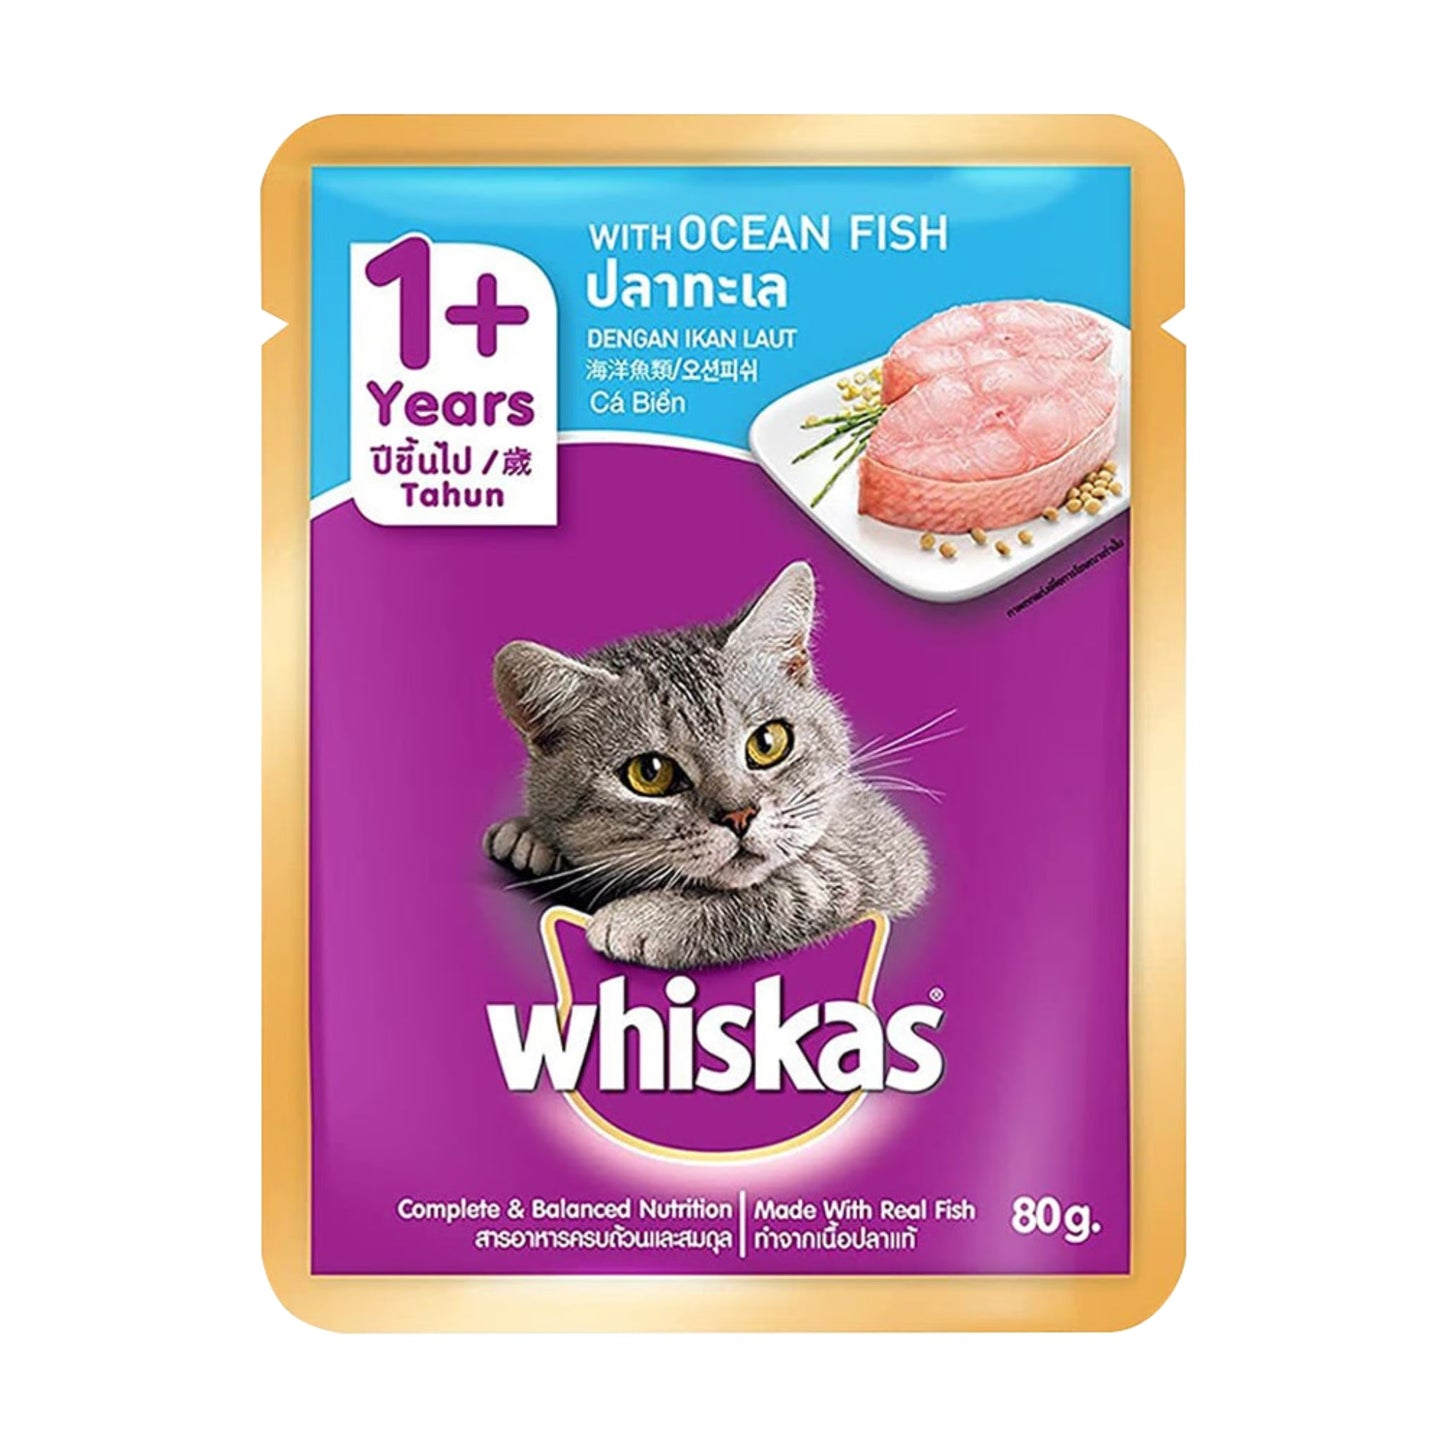 Whiskas Ocean Fish in Gravy Wet Food for Adult Cats - 80gm, Pack of 18